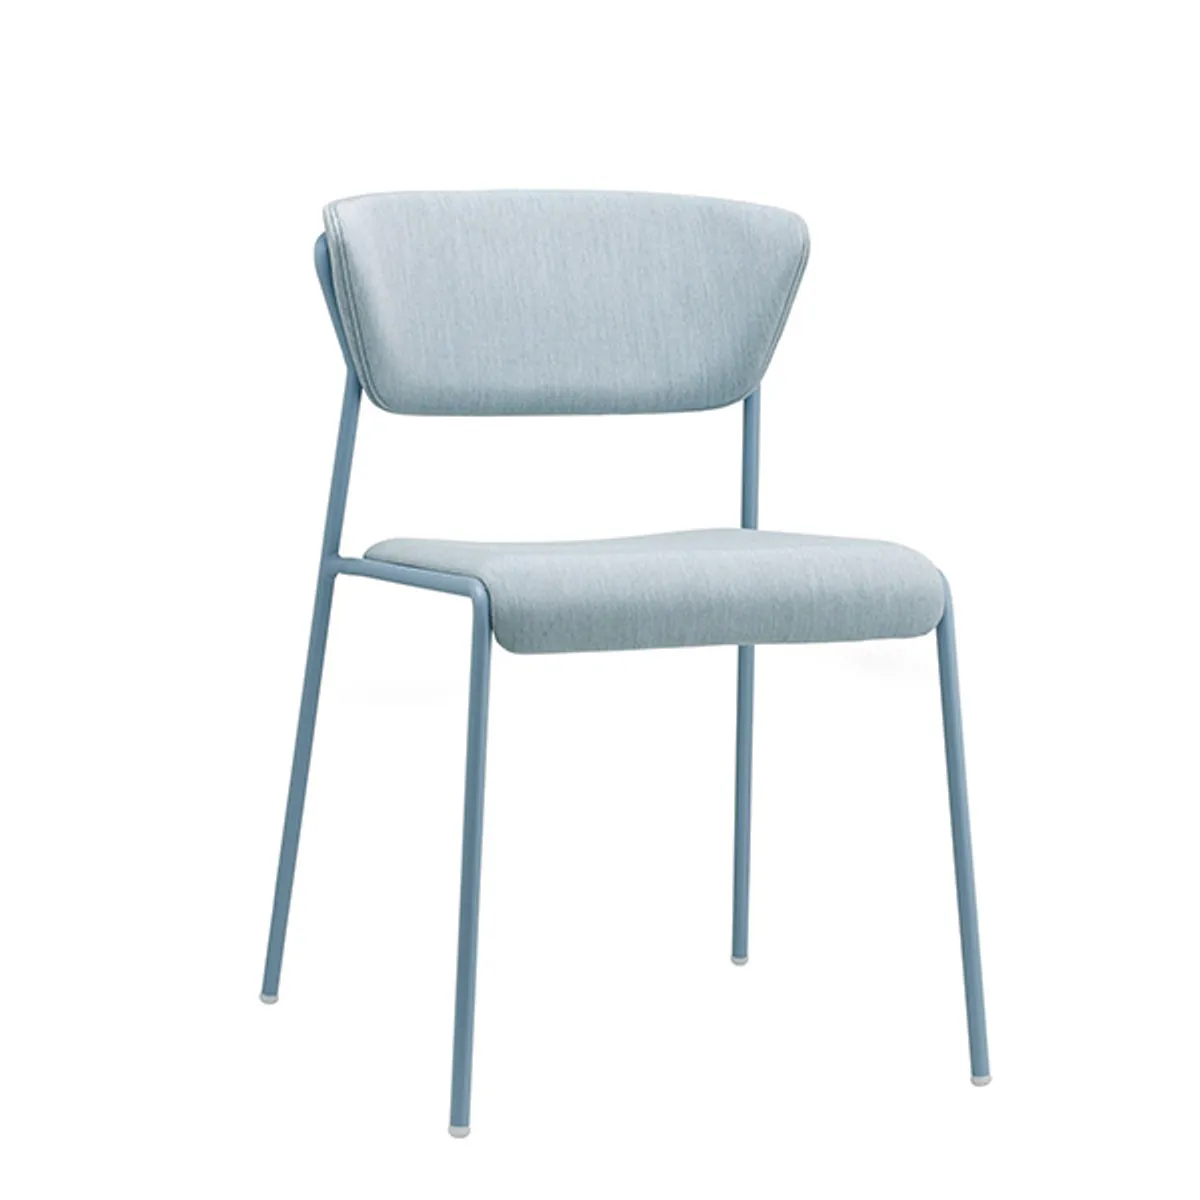 Robyn Soft Outdoor Chair Blue